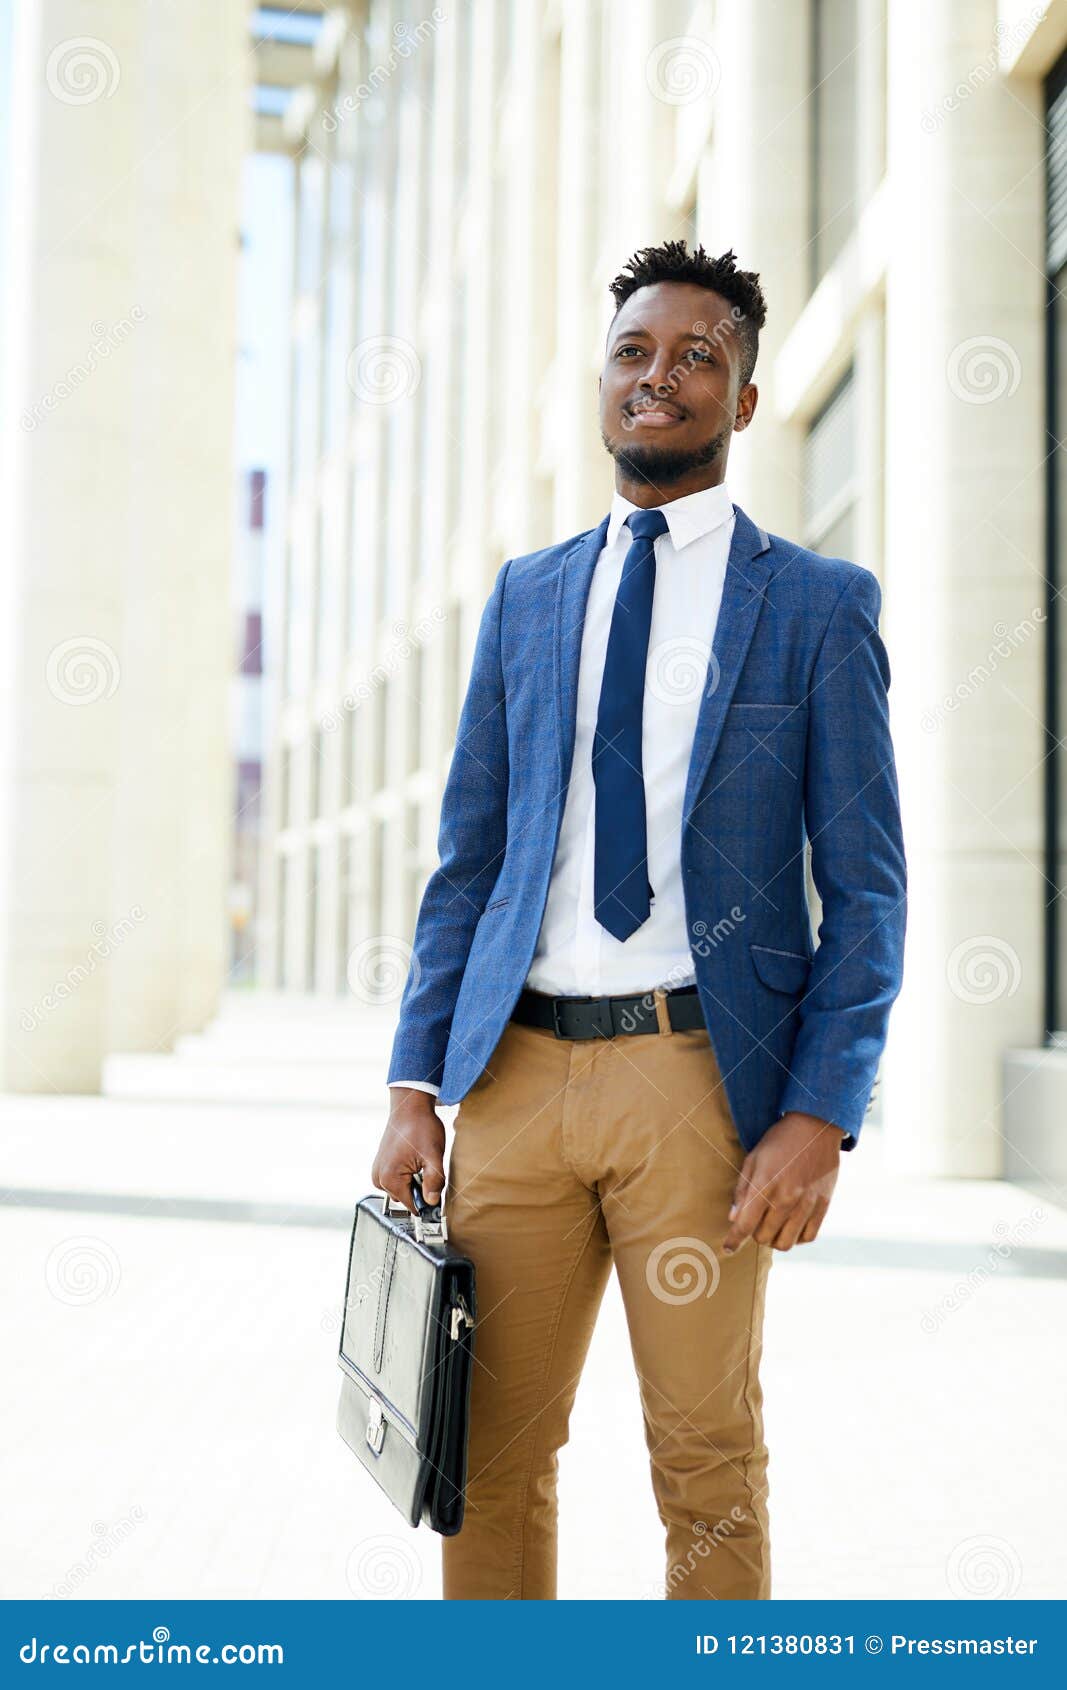 Pensive Black Entrepreneur with Briefcase Stock Image - Image of city ...